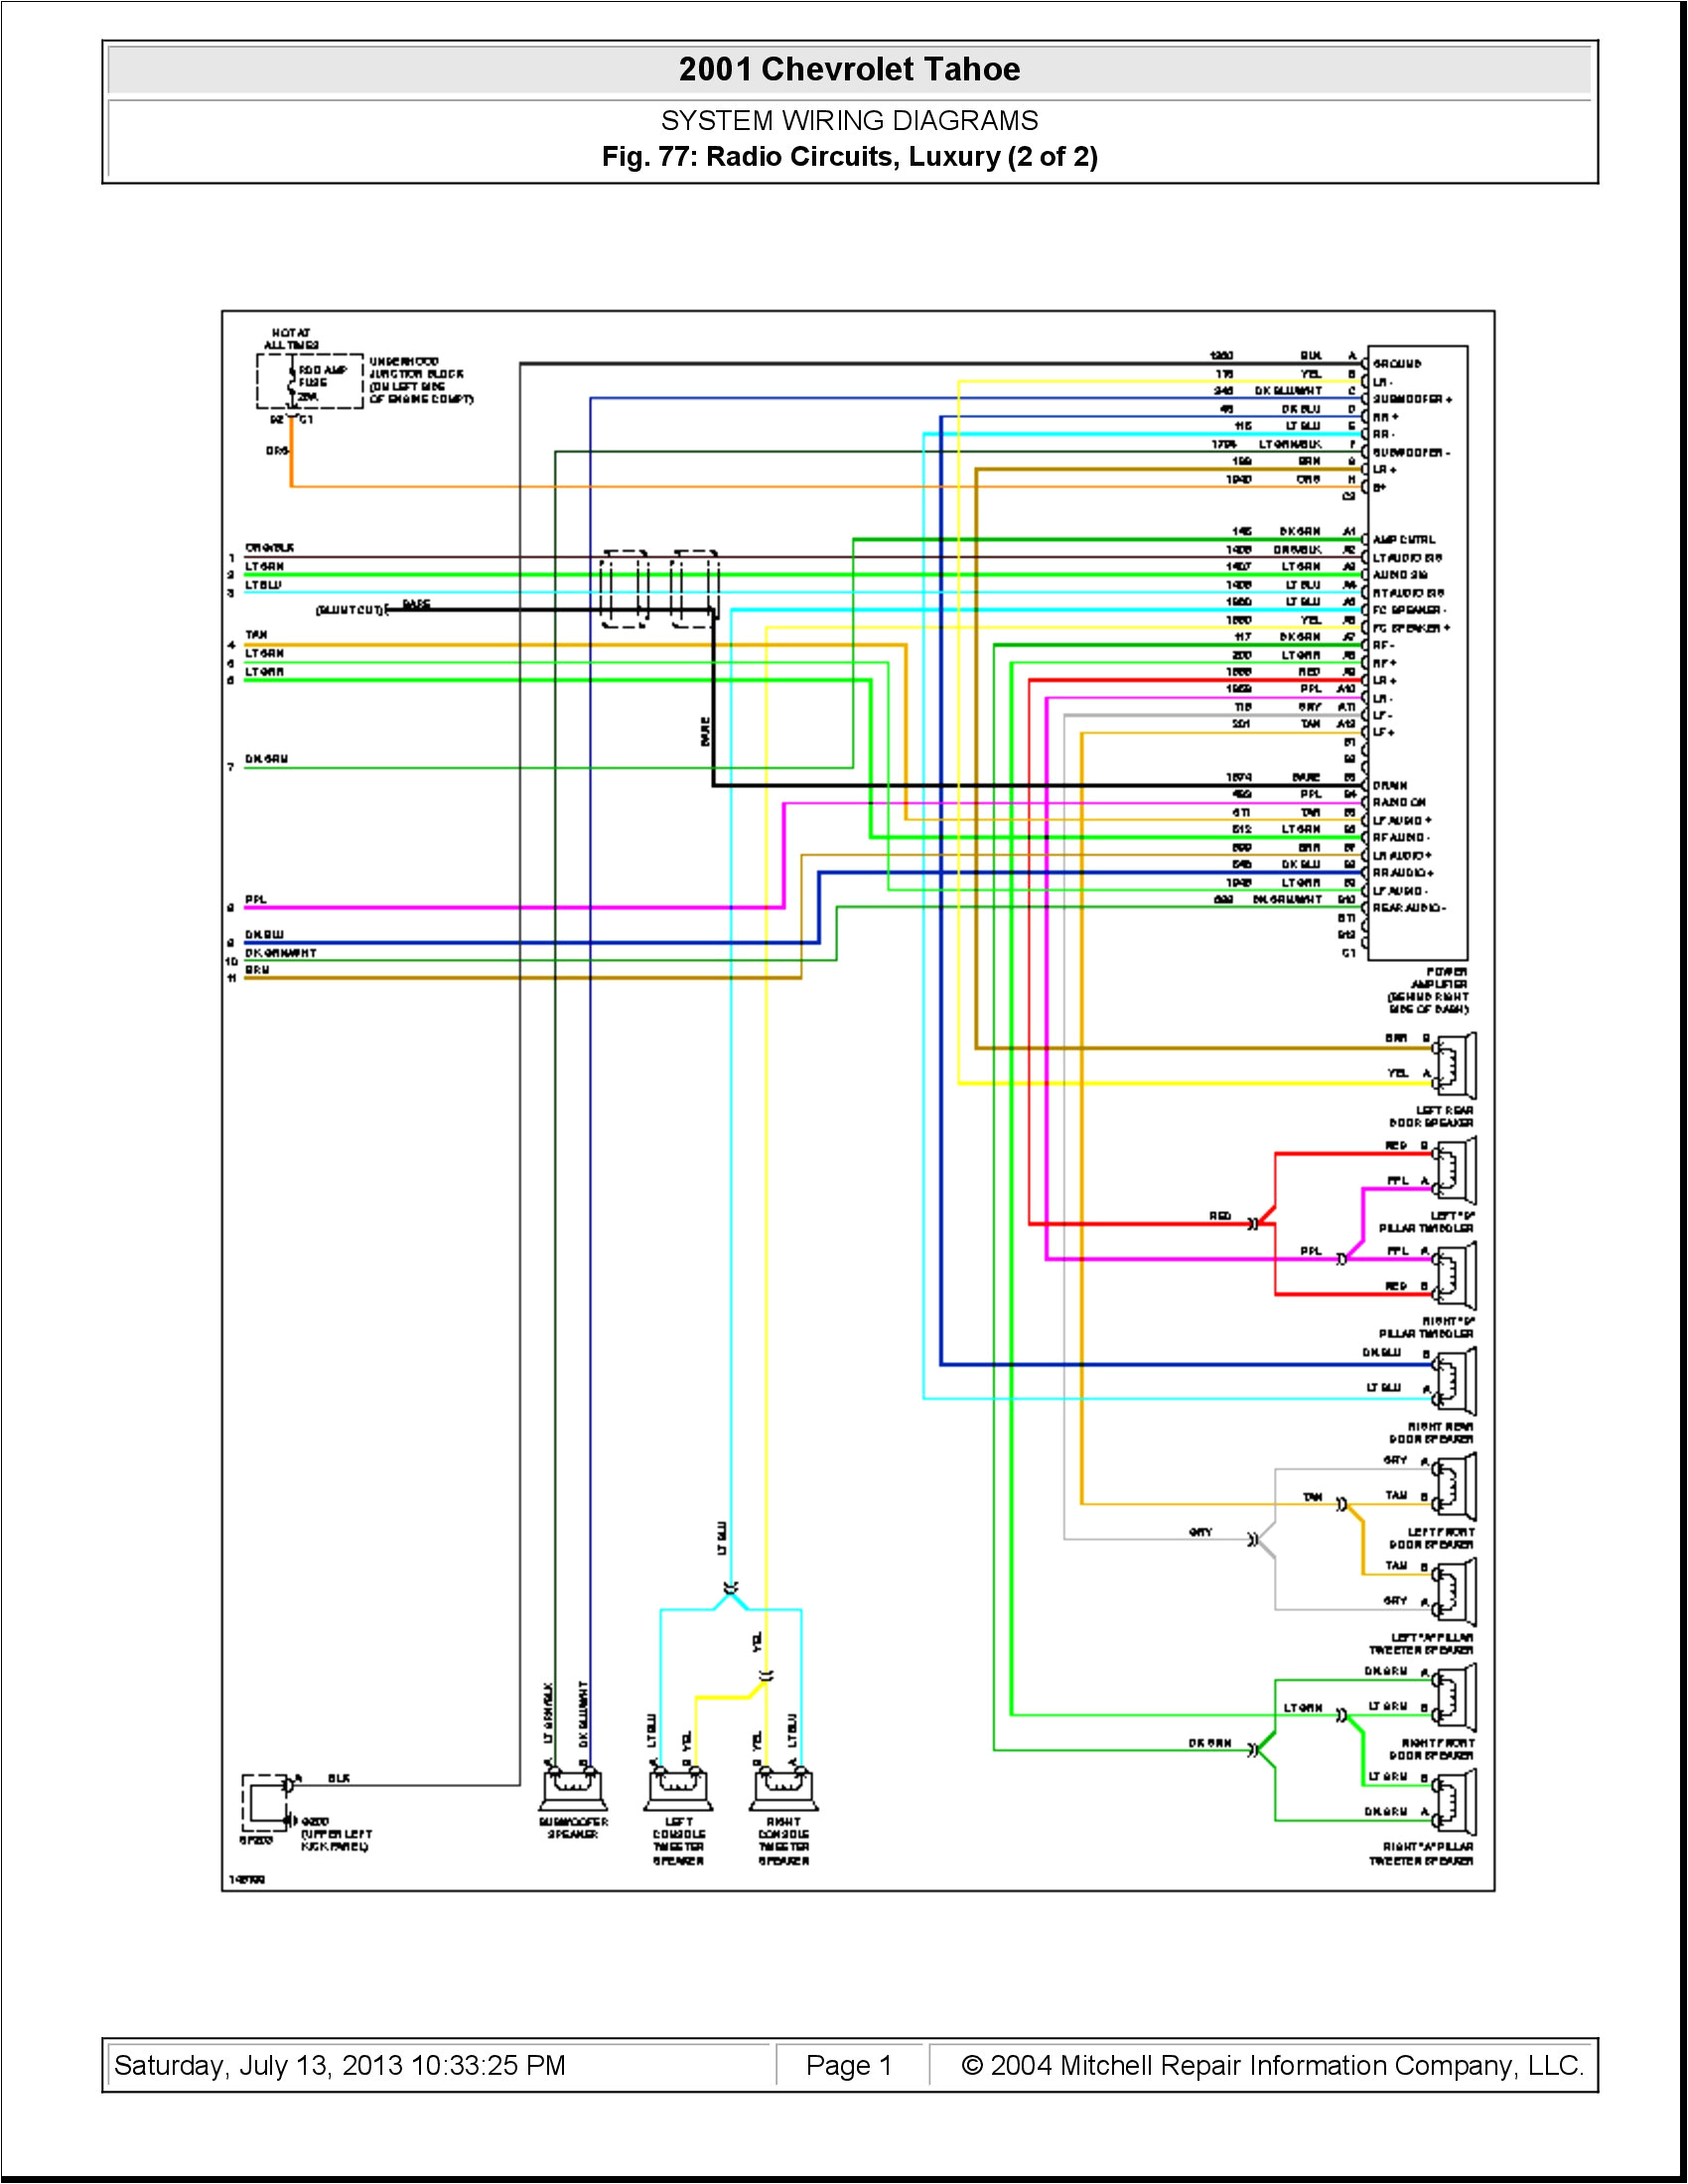 wiring diagram for 2008 chevy suburban get free image about wiring 2008 suburban factory amp wiring diagram 2008 suburban wiring diagram